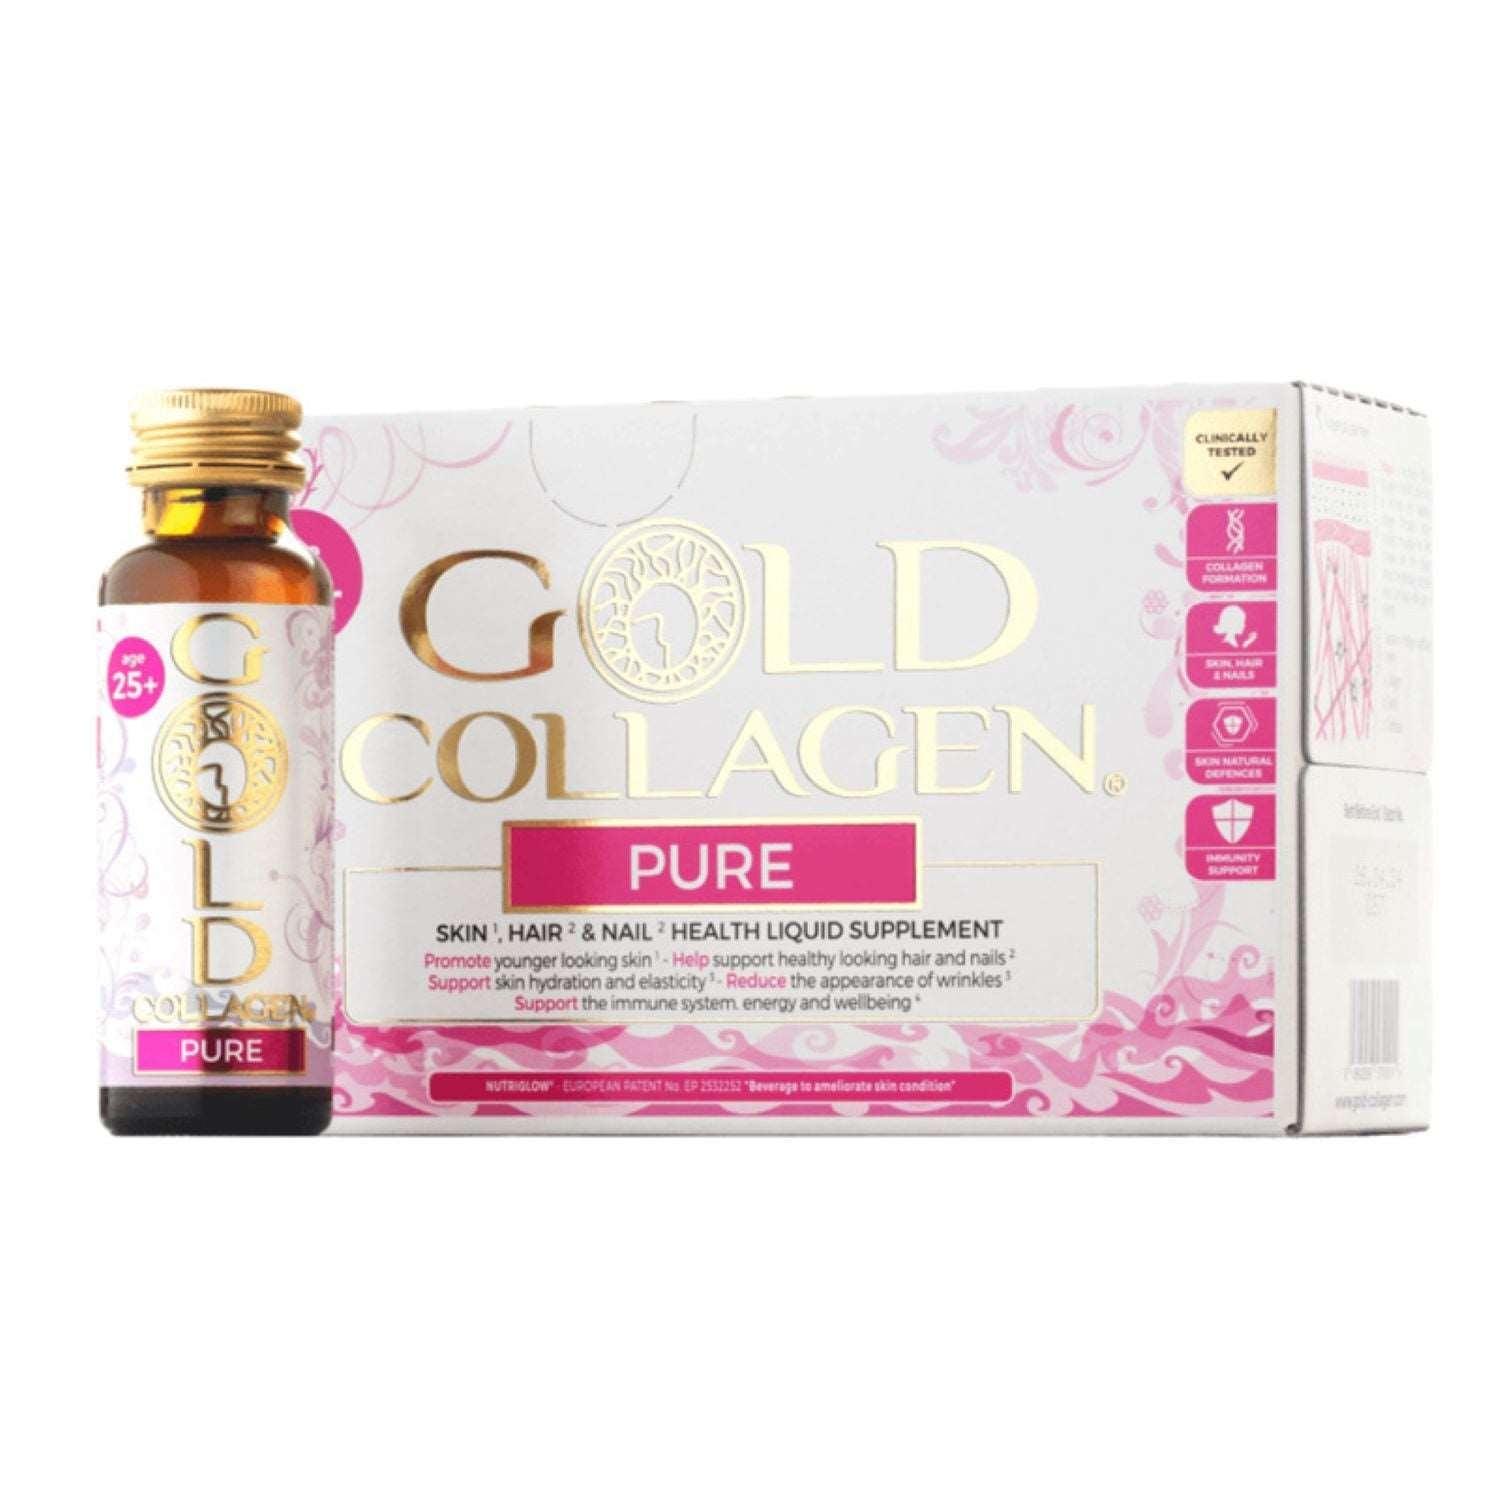 GOLD COLLAGEN - PURE 50ml Bottles - Pack Of 10'S